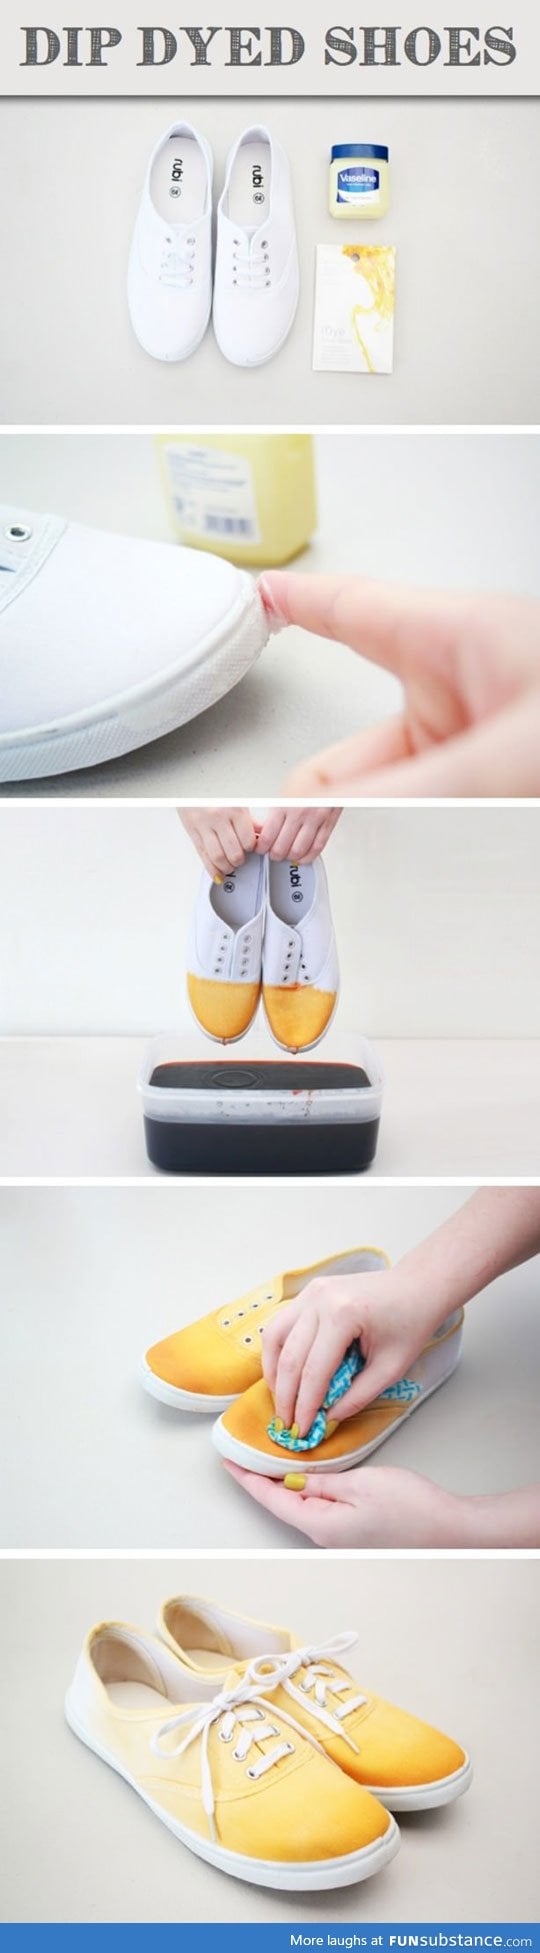 Dye your shoes with an interesting color